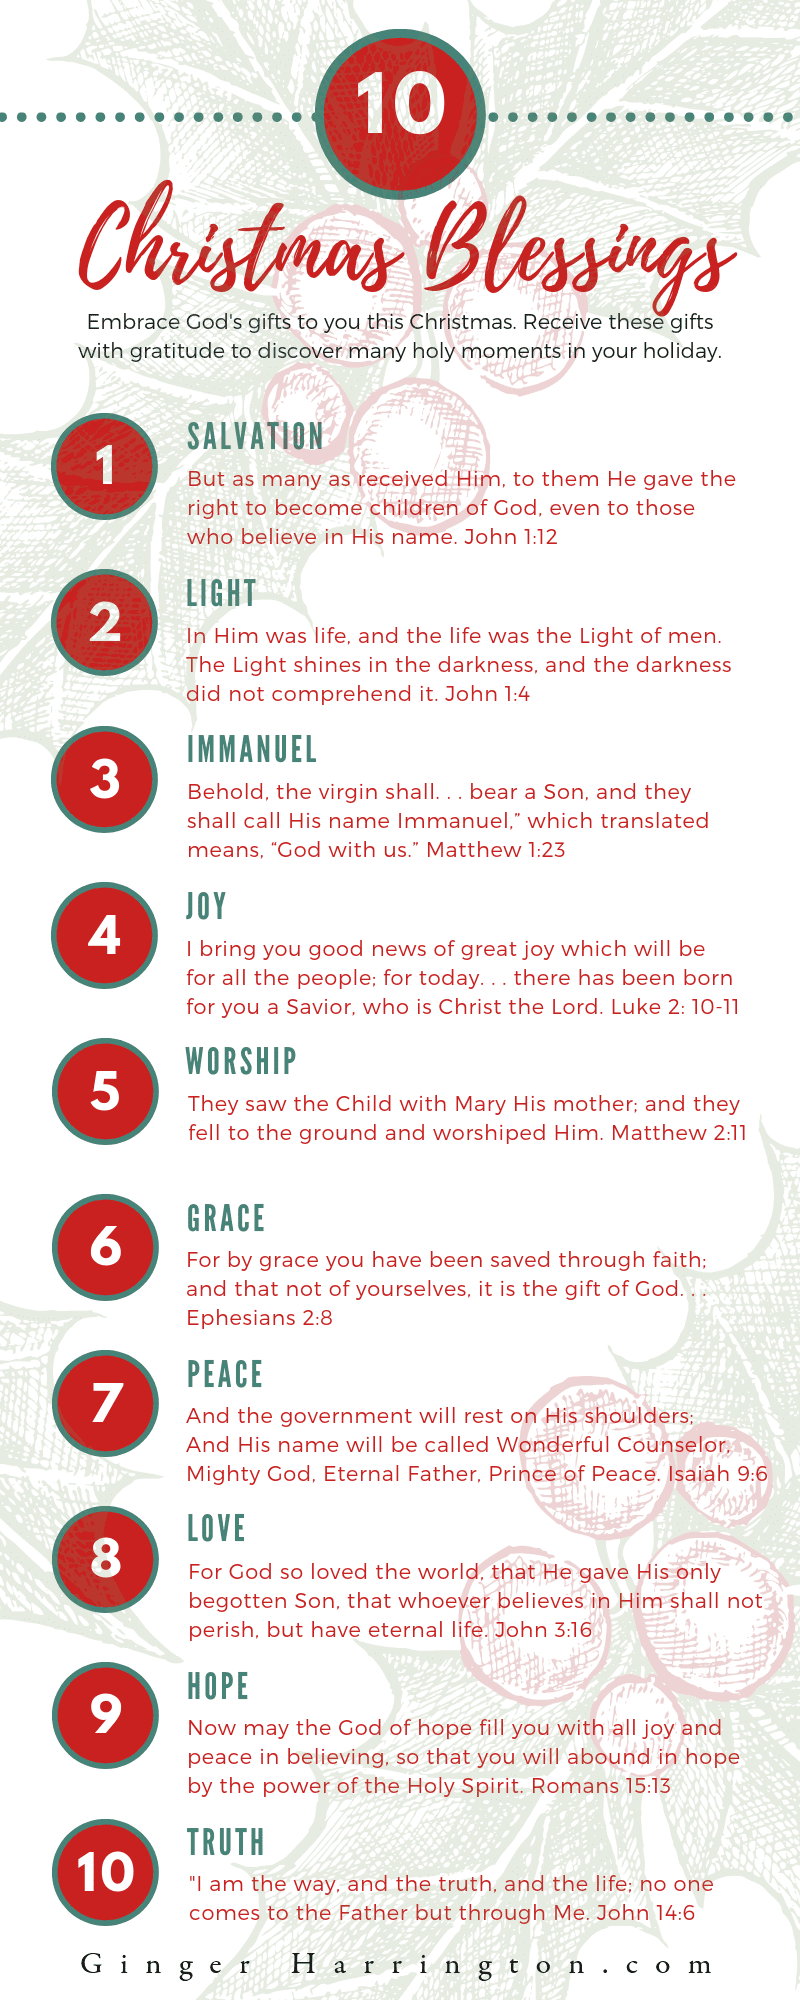 This infographic shares 10 Christmas Blessings, God's holy gifts to us. Enjoy these verses to reflect on the best gifts of Christmas: Salvation, Light, Immanuel, Joy, Worship, Grace, Peace, Love, Hope, and Truth.